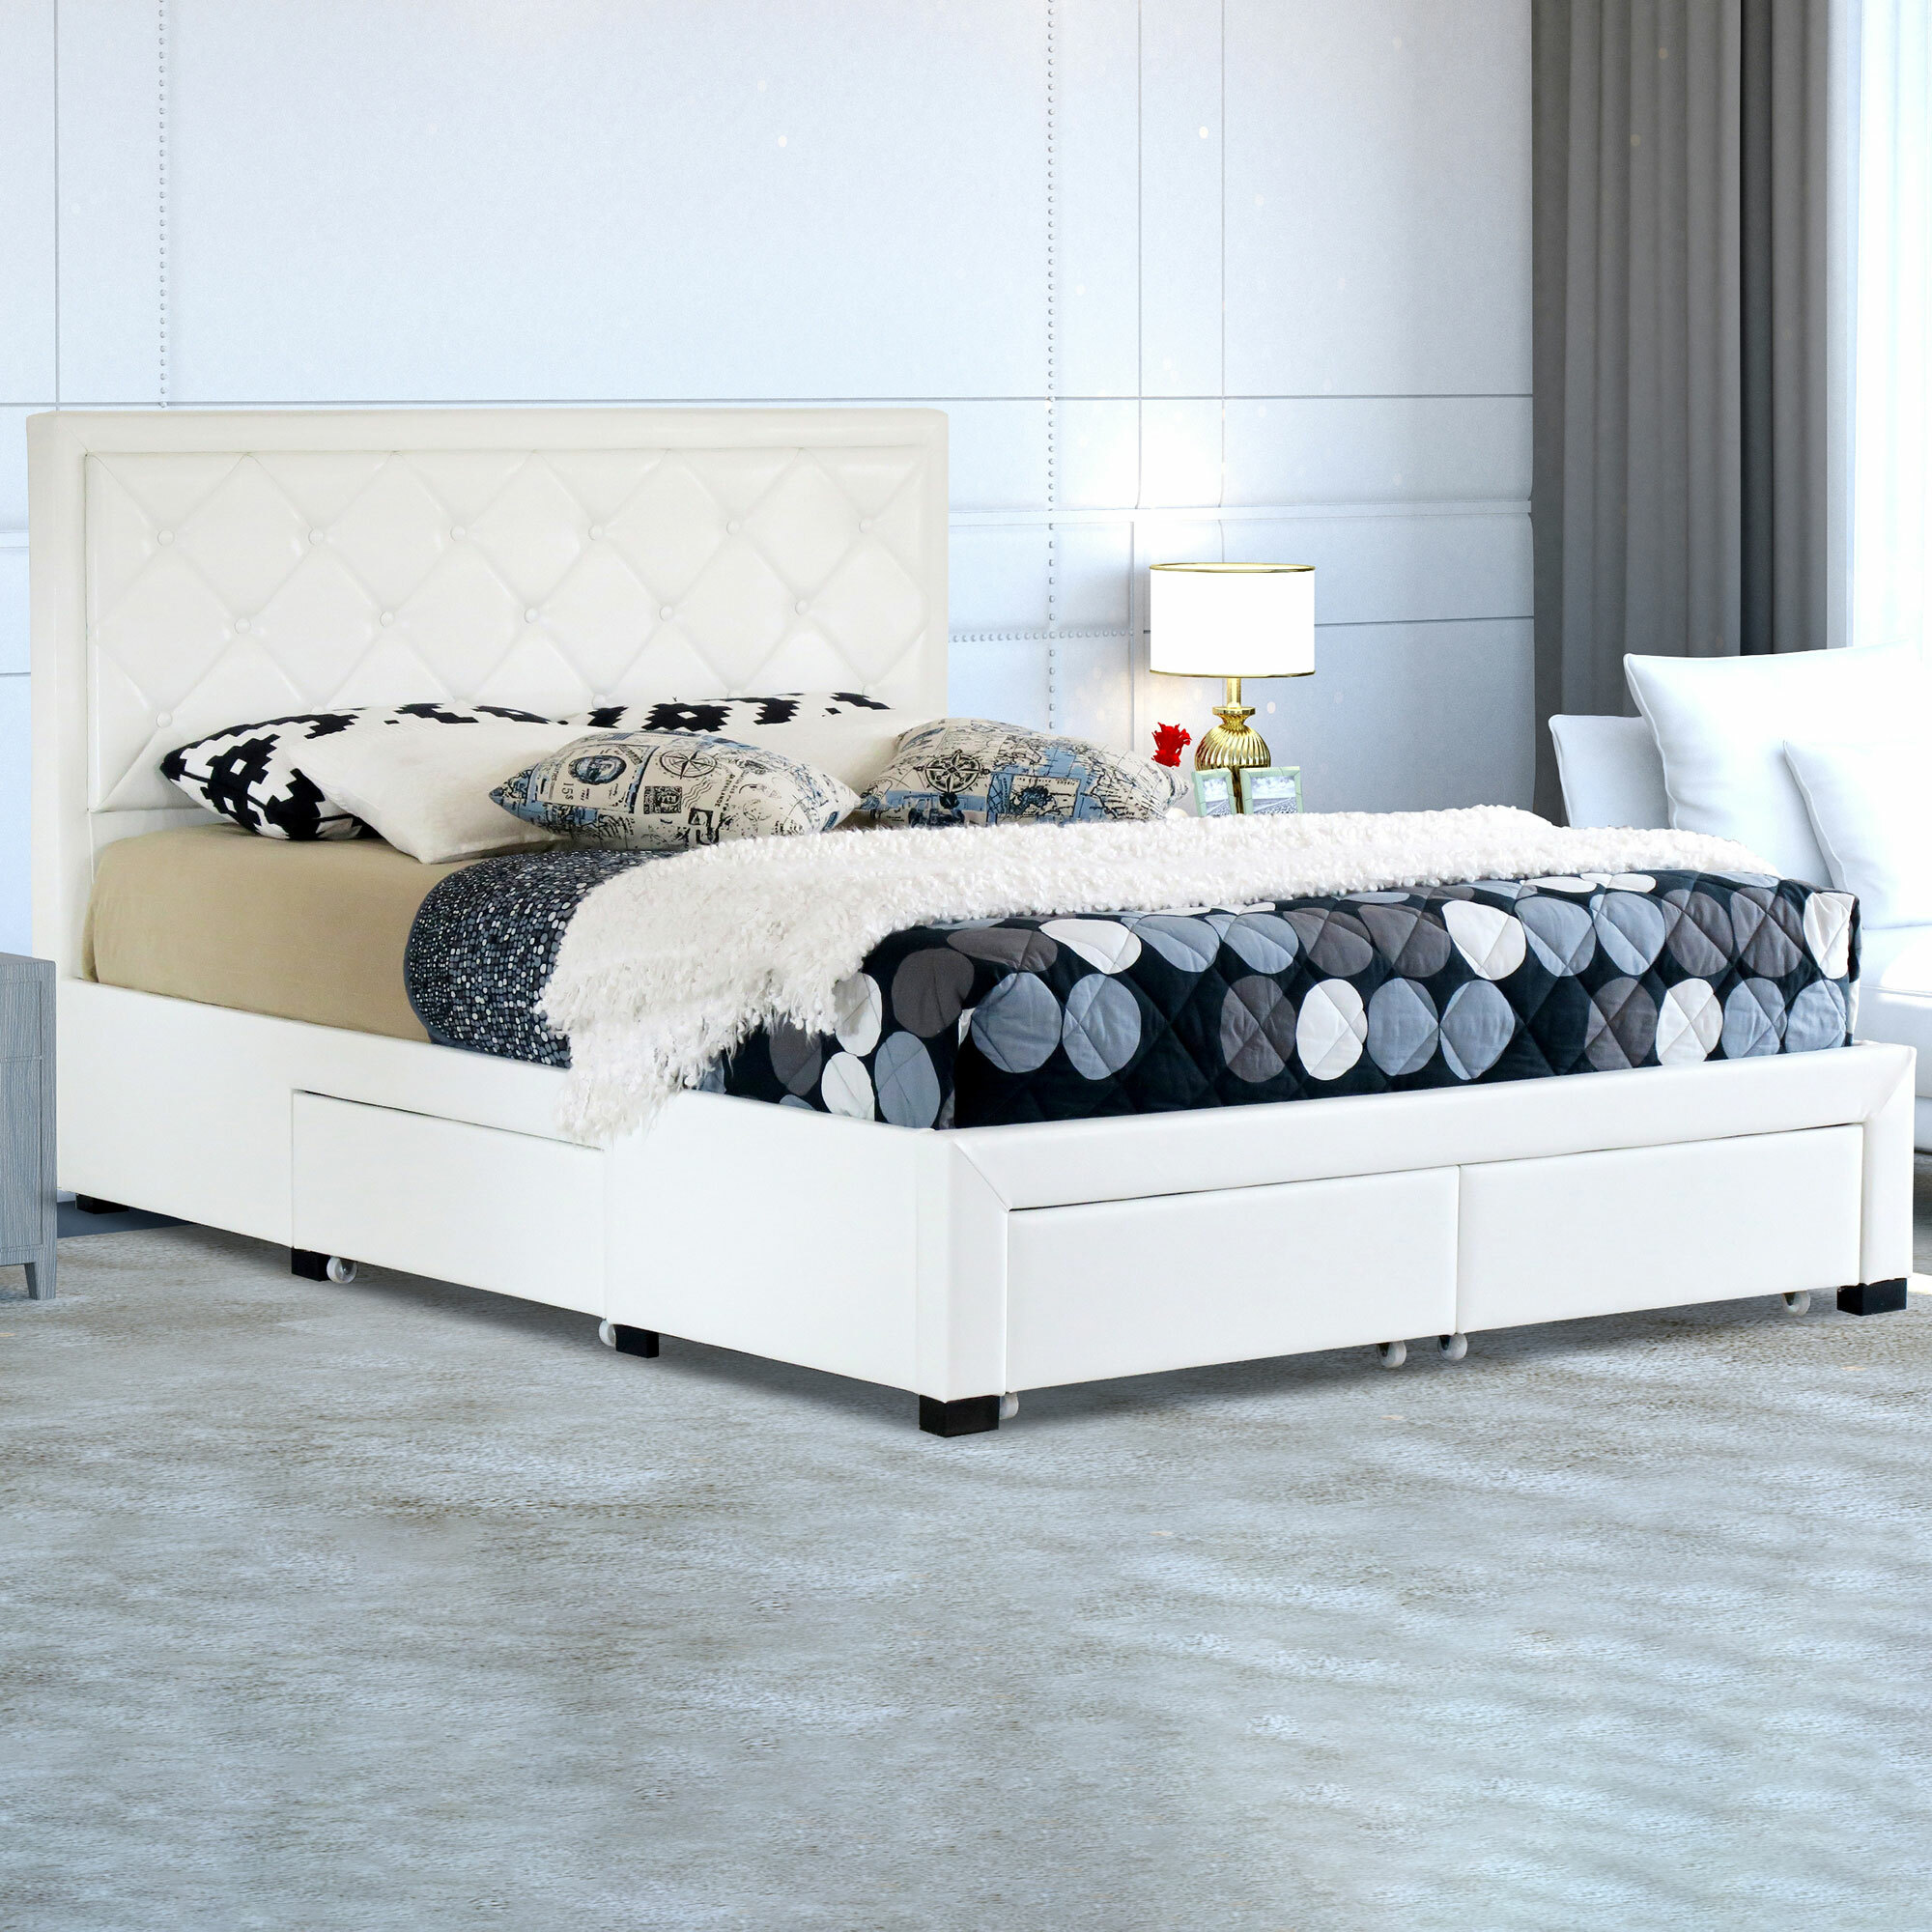 Faux Leather Bed Frame With Storage, White Faux Leather Beds